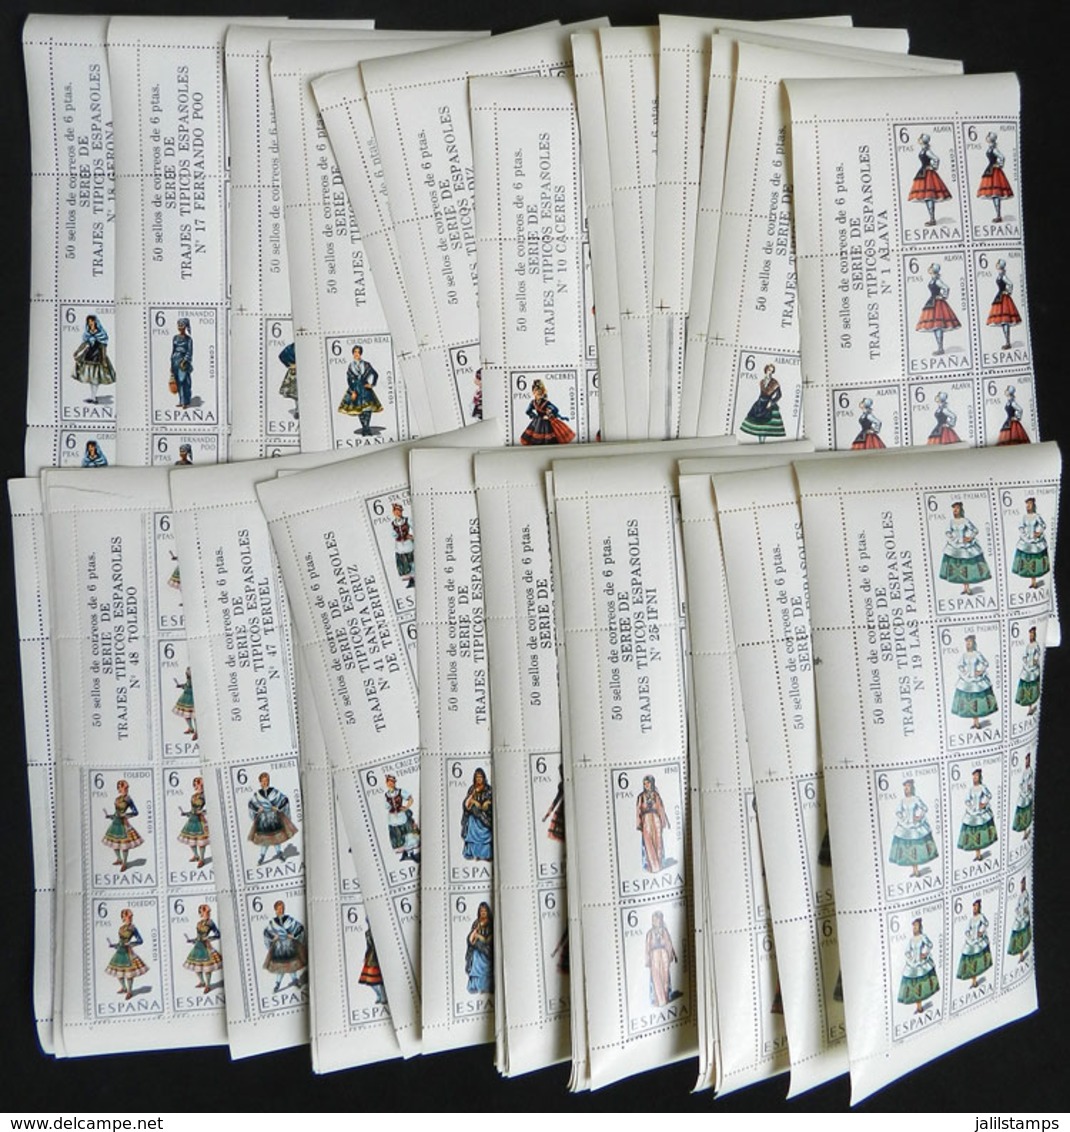 SPAIN: Year 1970 And Following, TYPICAL COSTUMES, Complete Set Of 53 Values In Corner Blocks Of 10 Stamps + 2 Labels, Ve - Unused Stamps